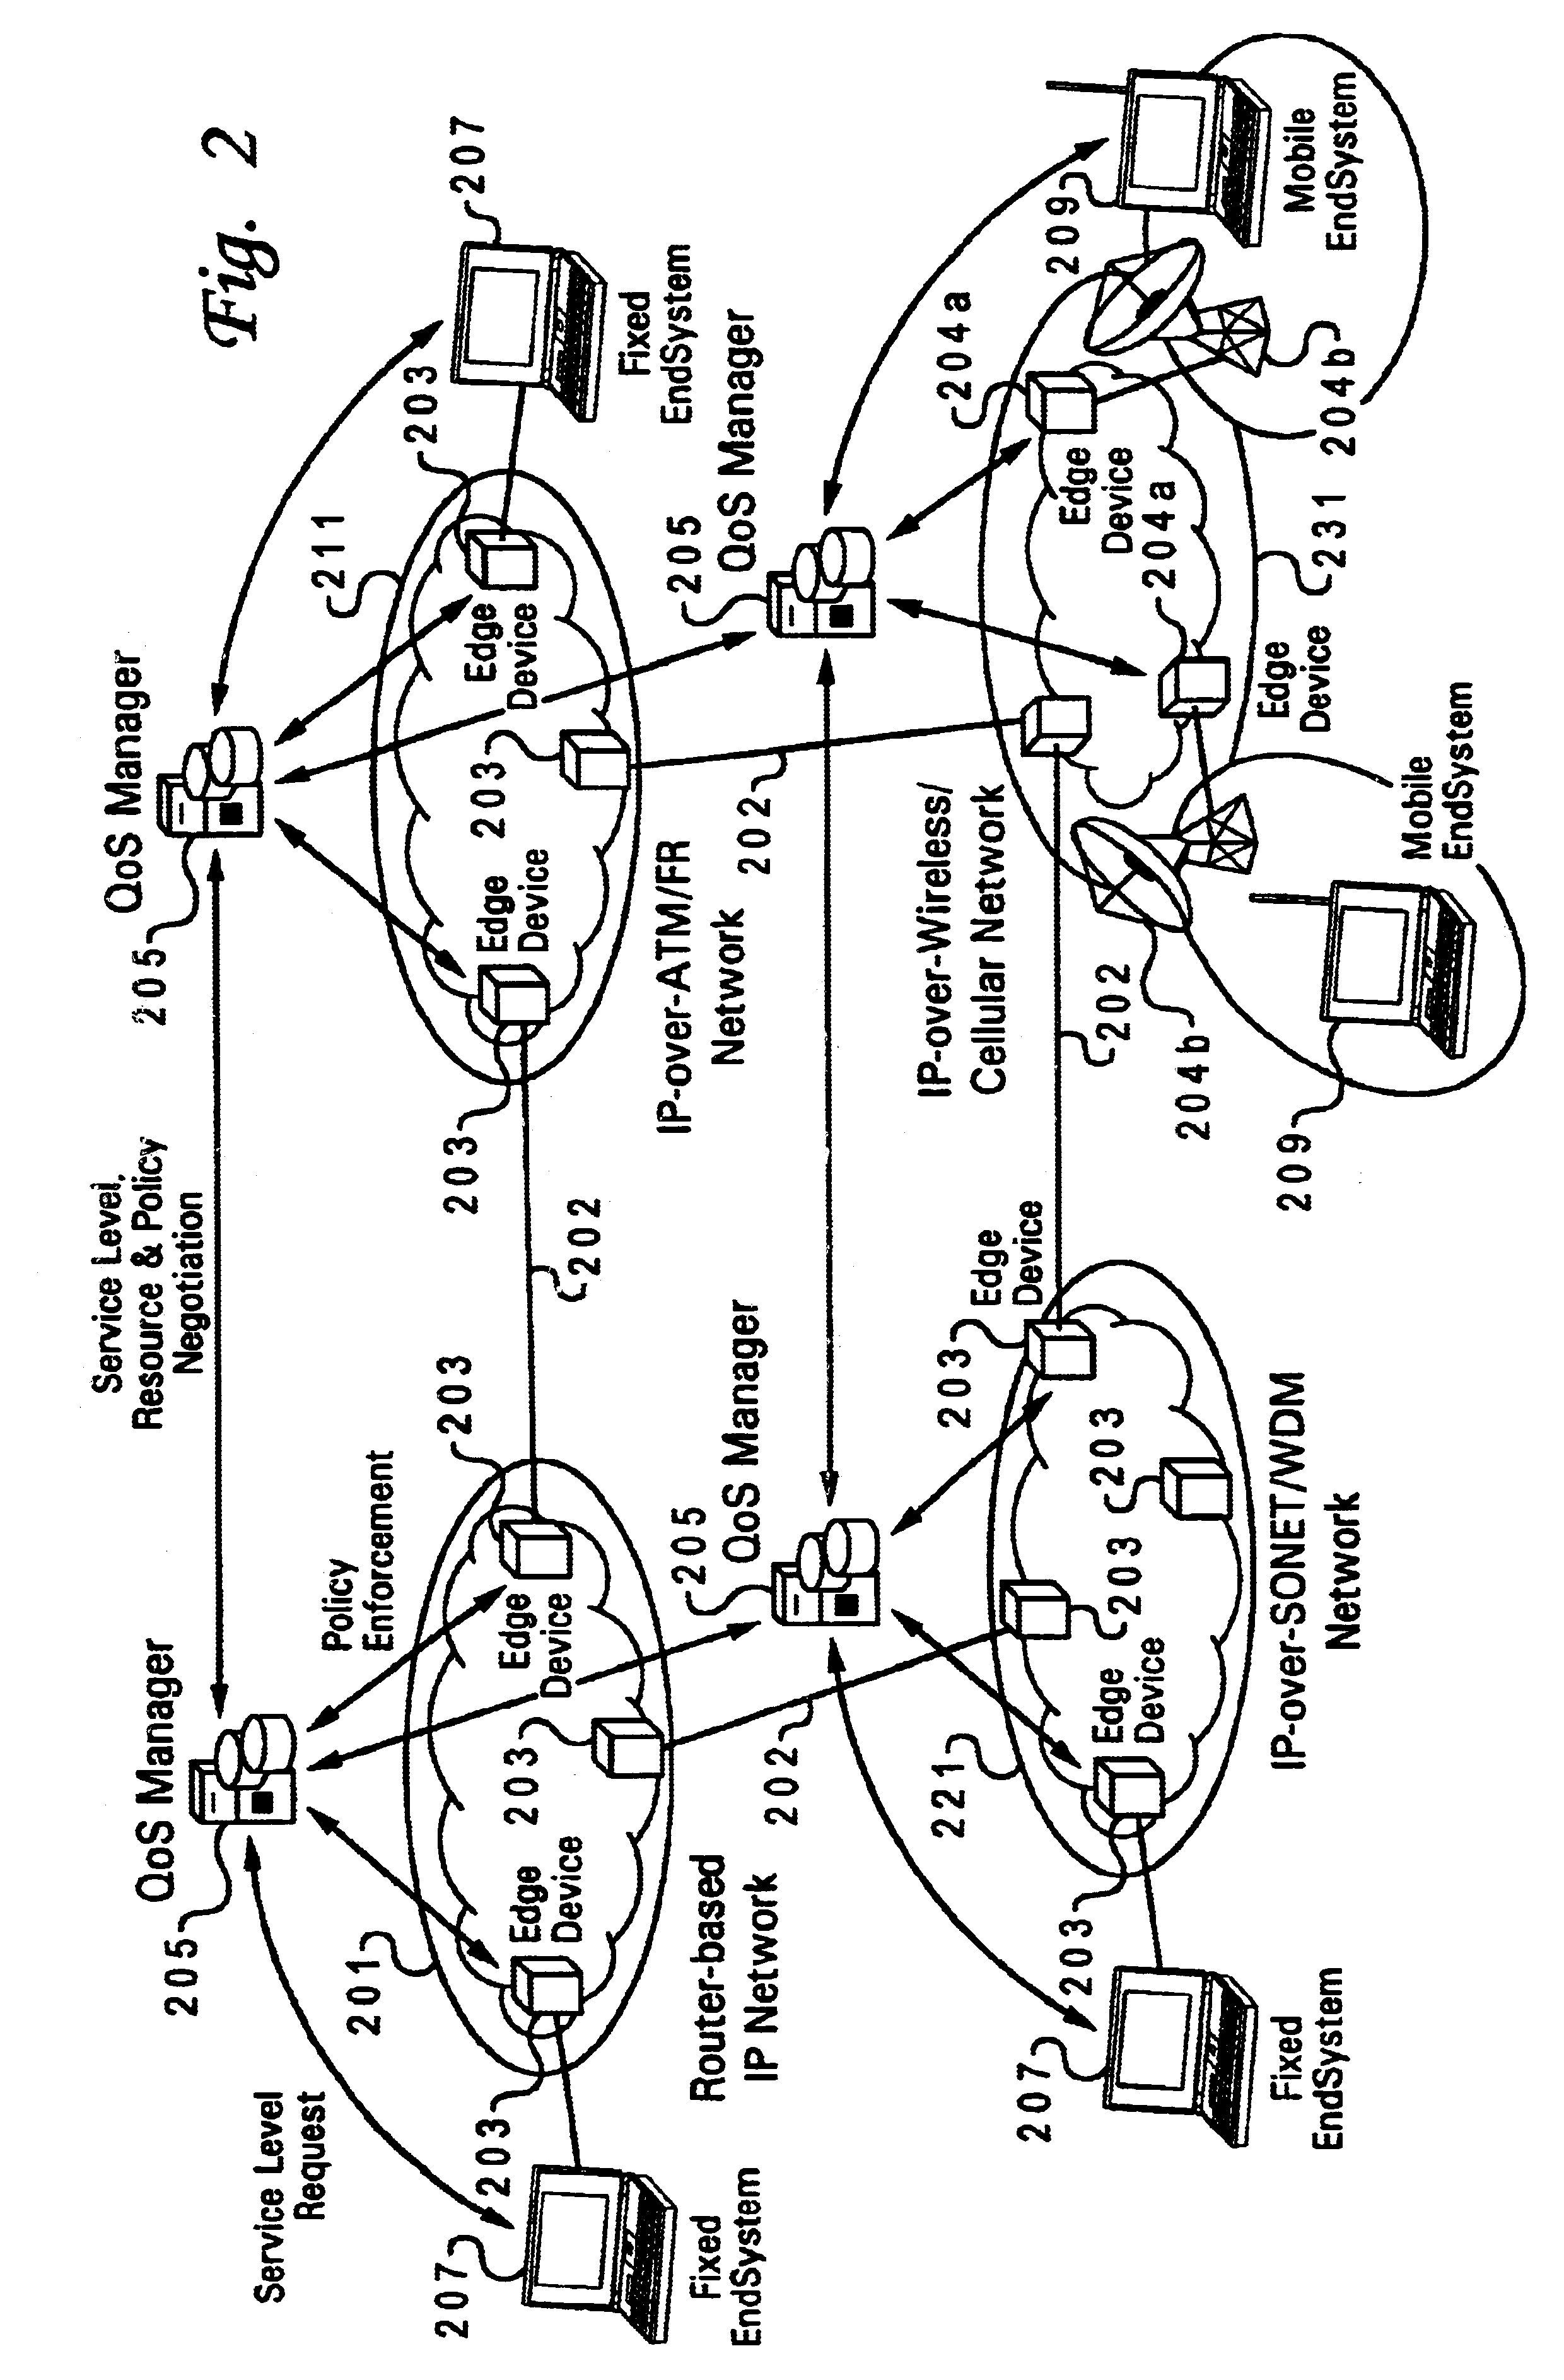 Method and system for wireless QOS agent for all-IP network